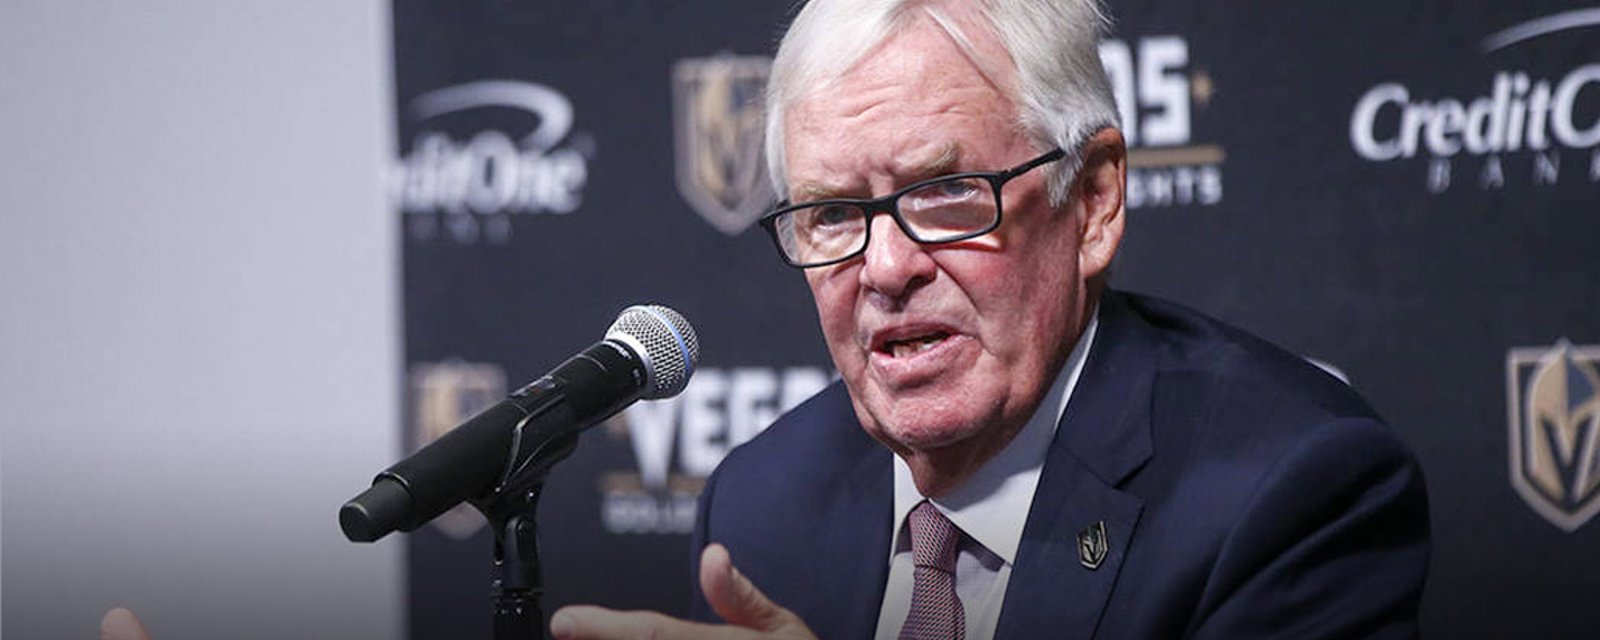 Knights owner Bill Foley vows to change NHL rules following blown call in Game 7